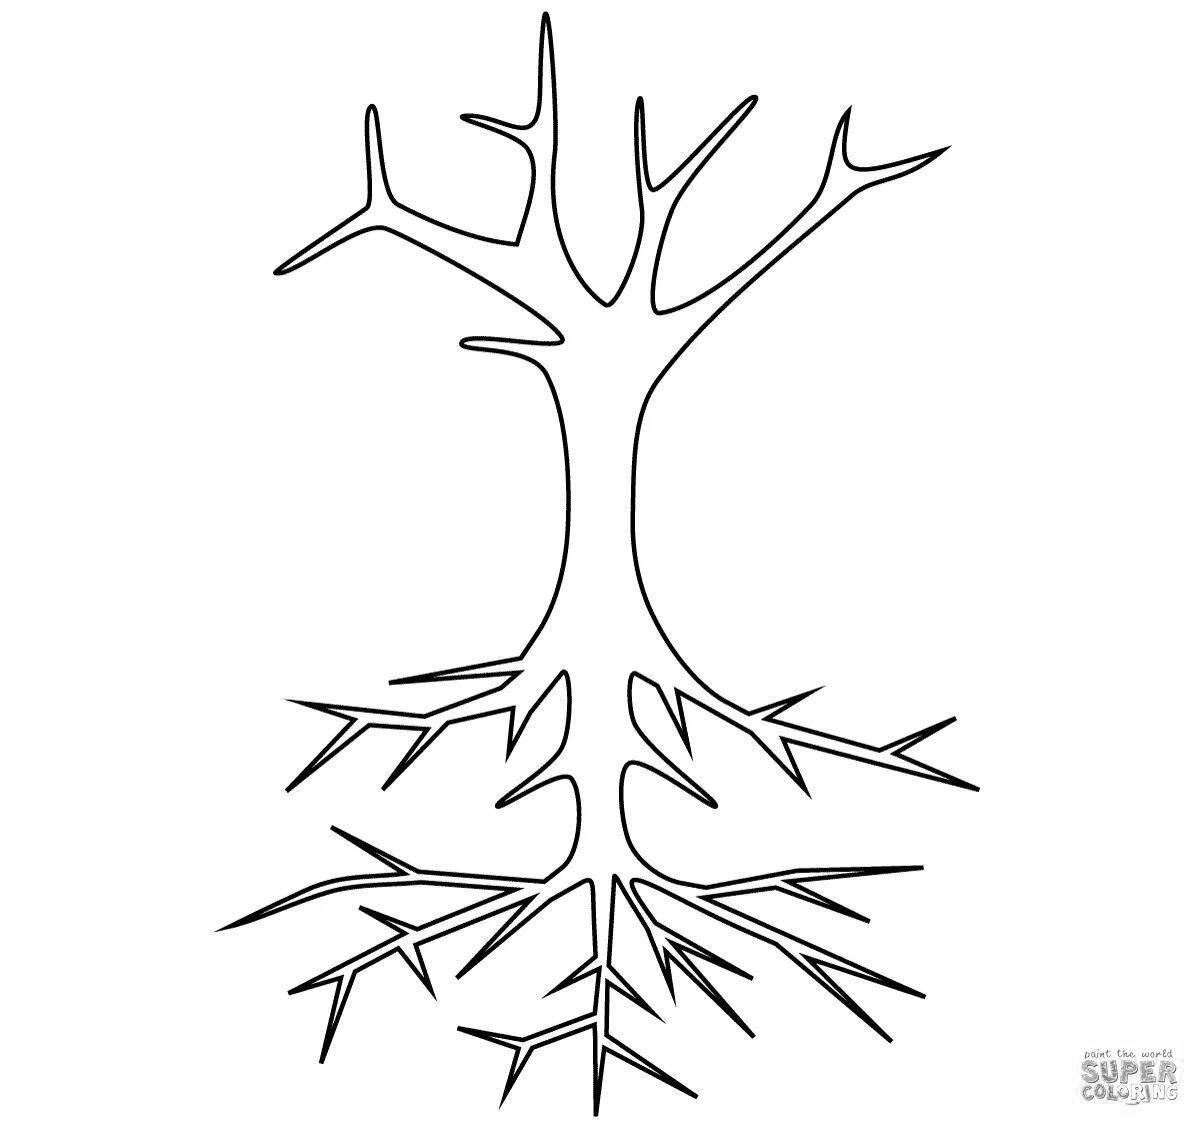 Vibrant tree trunk coloring page for toddlers